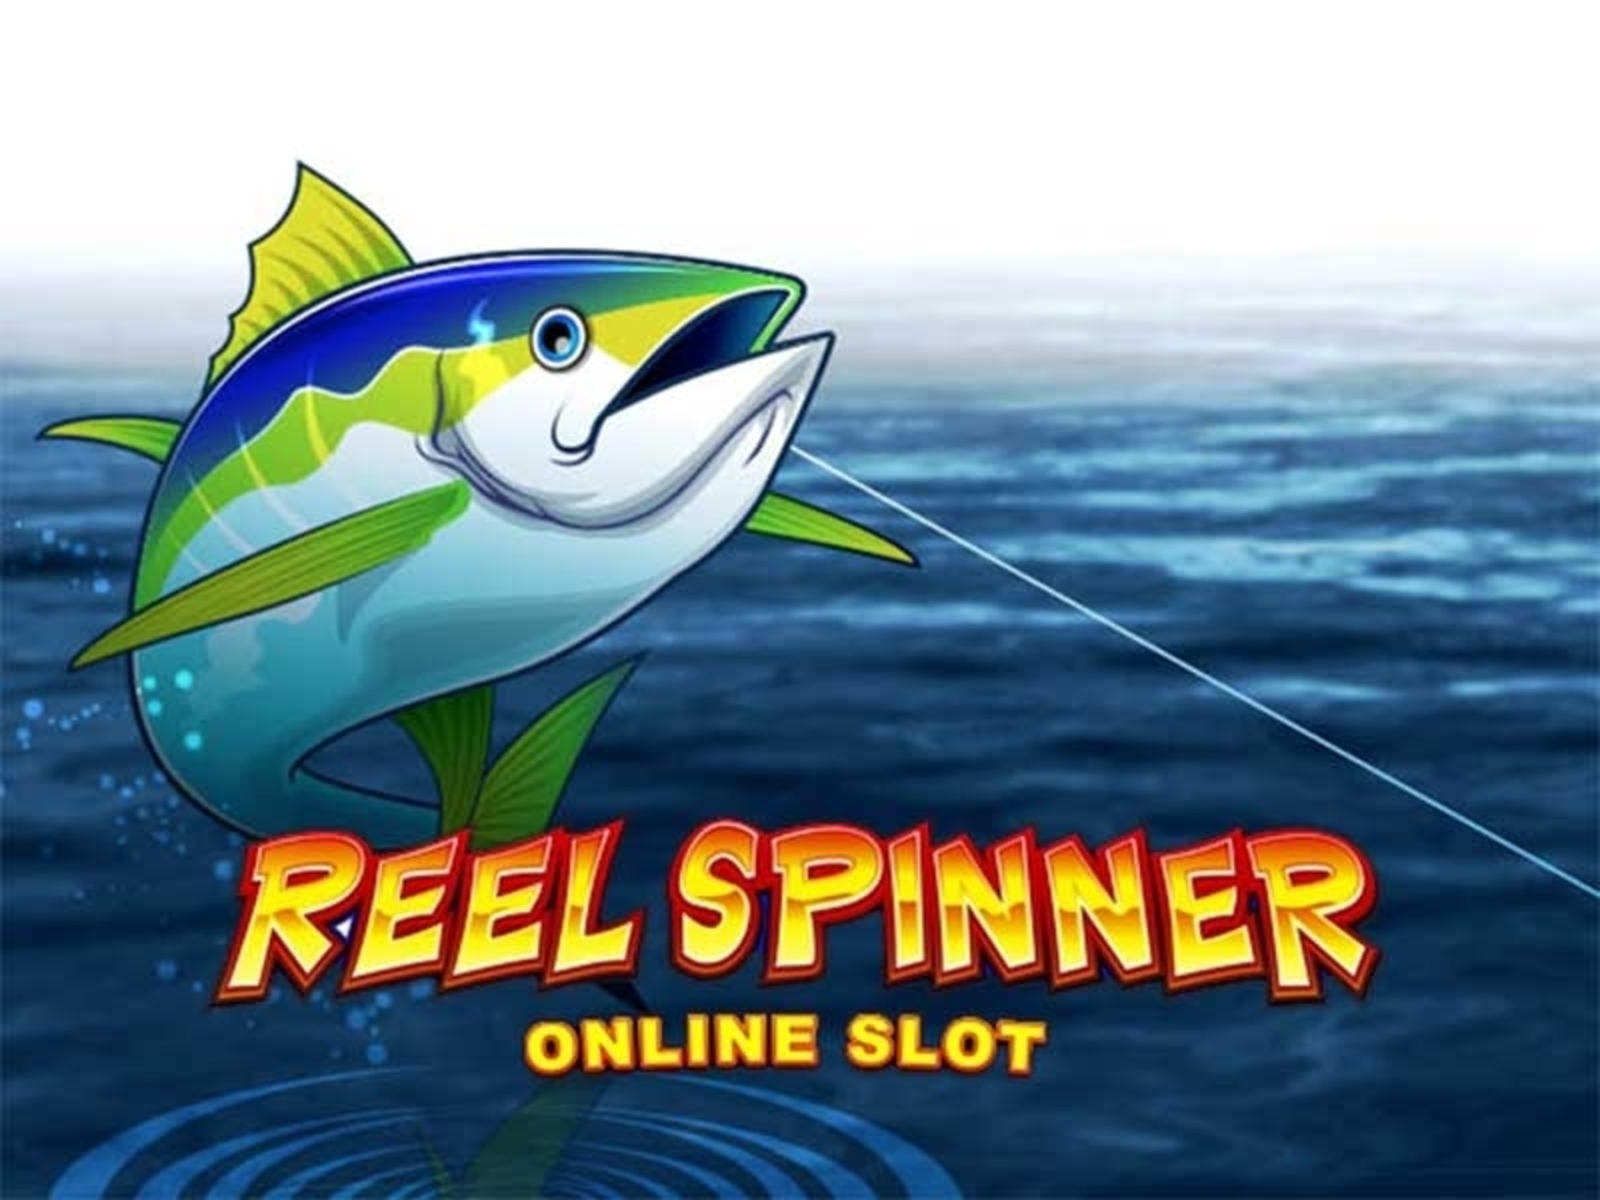 The Reel Spinner Online Slot Demo Game by Microgaming